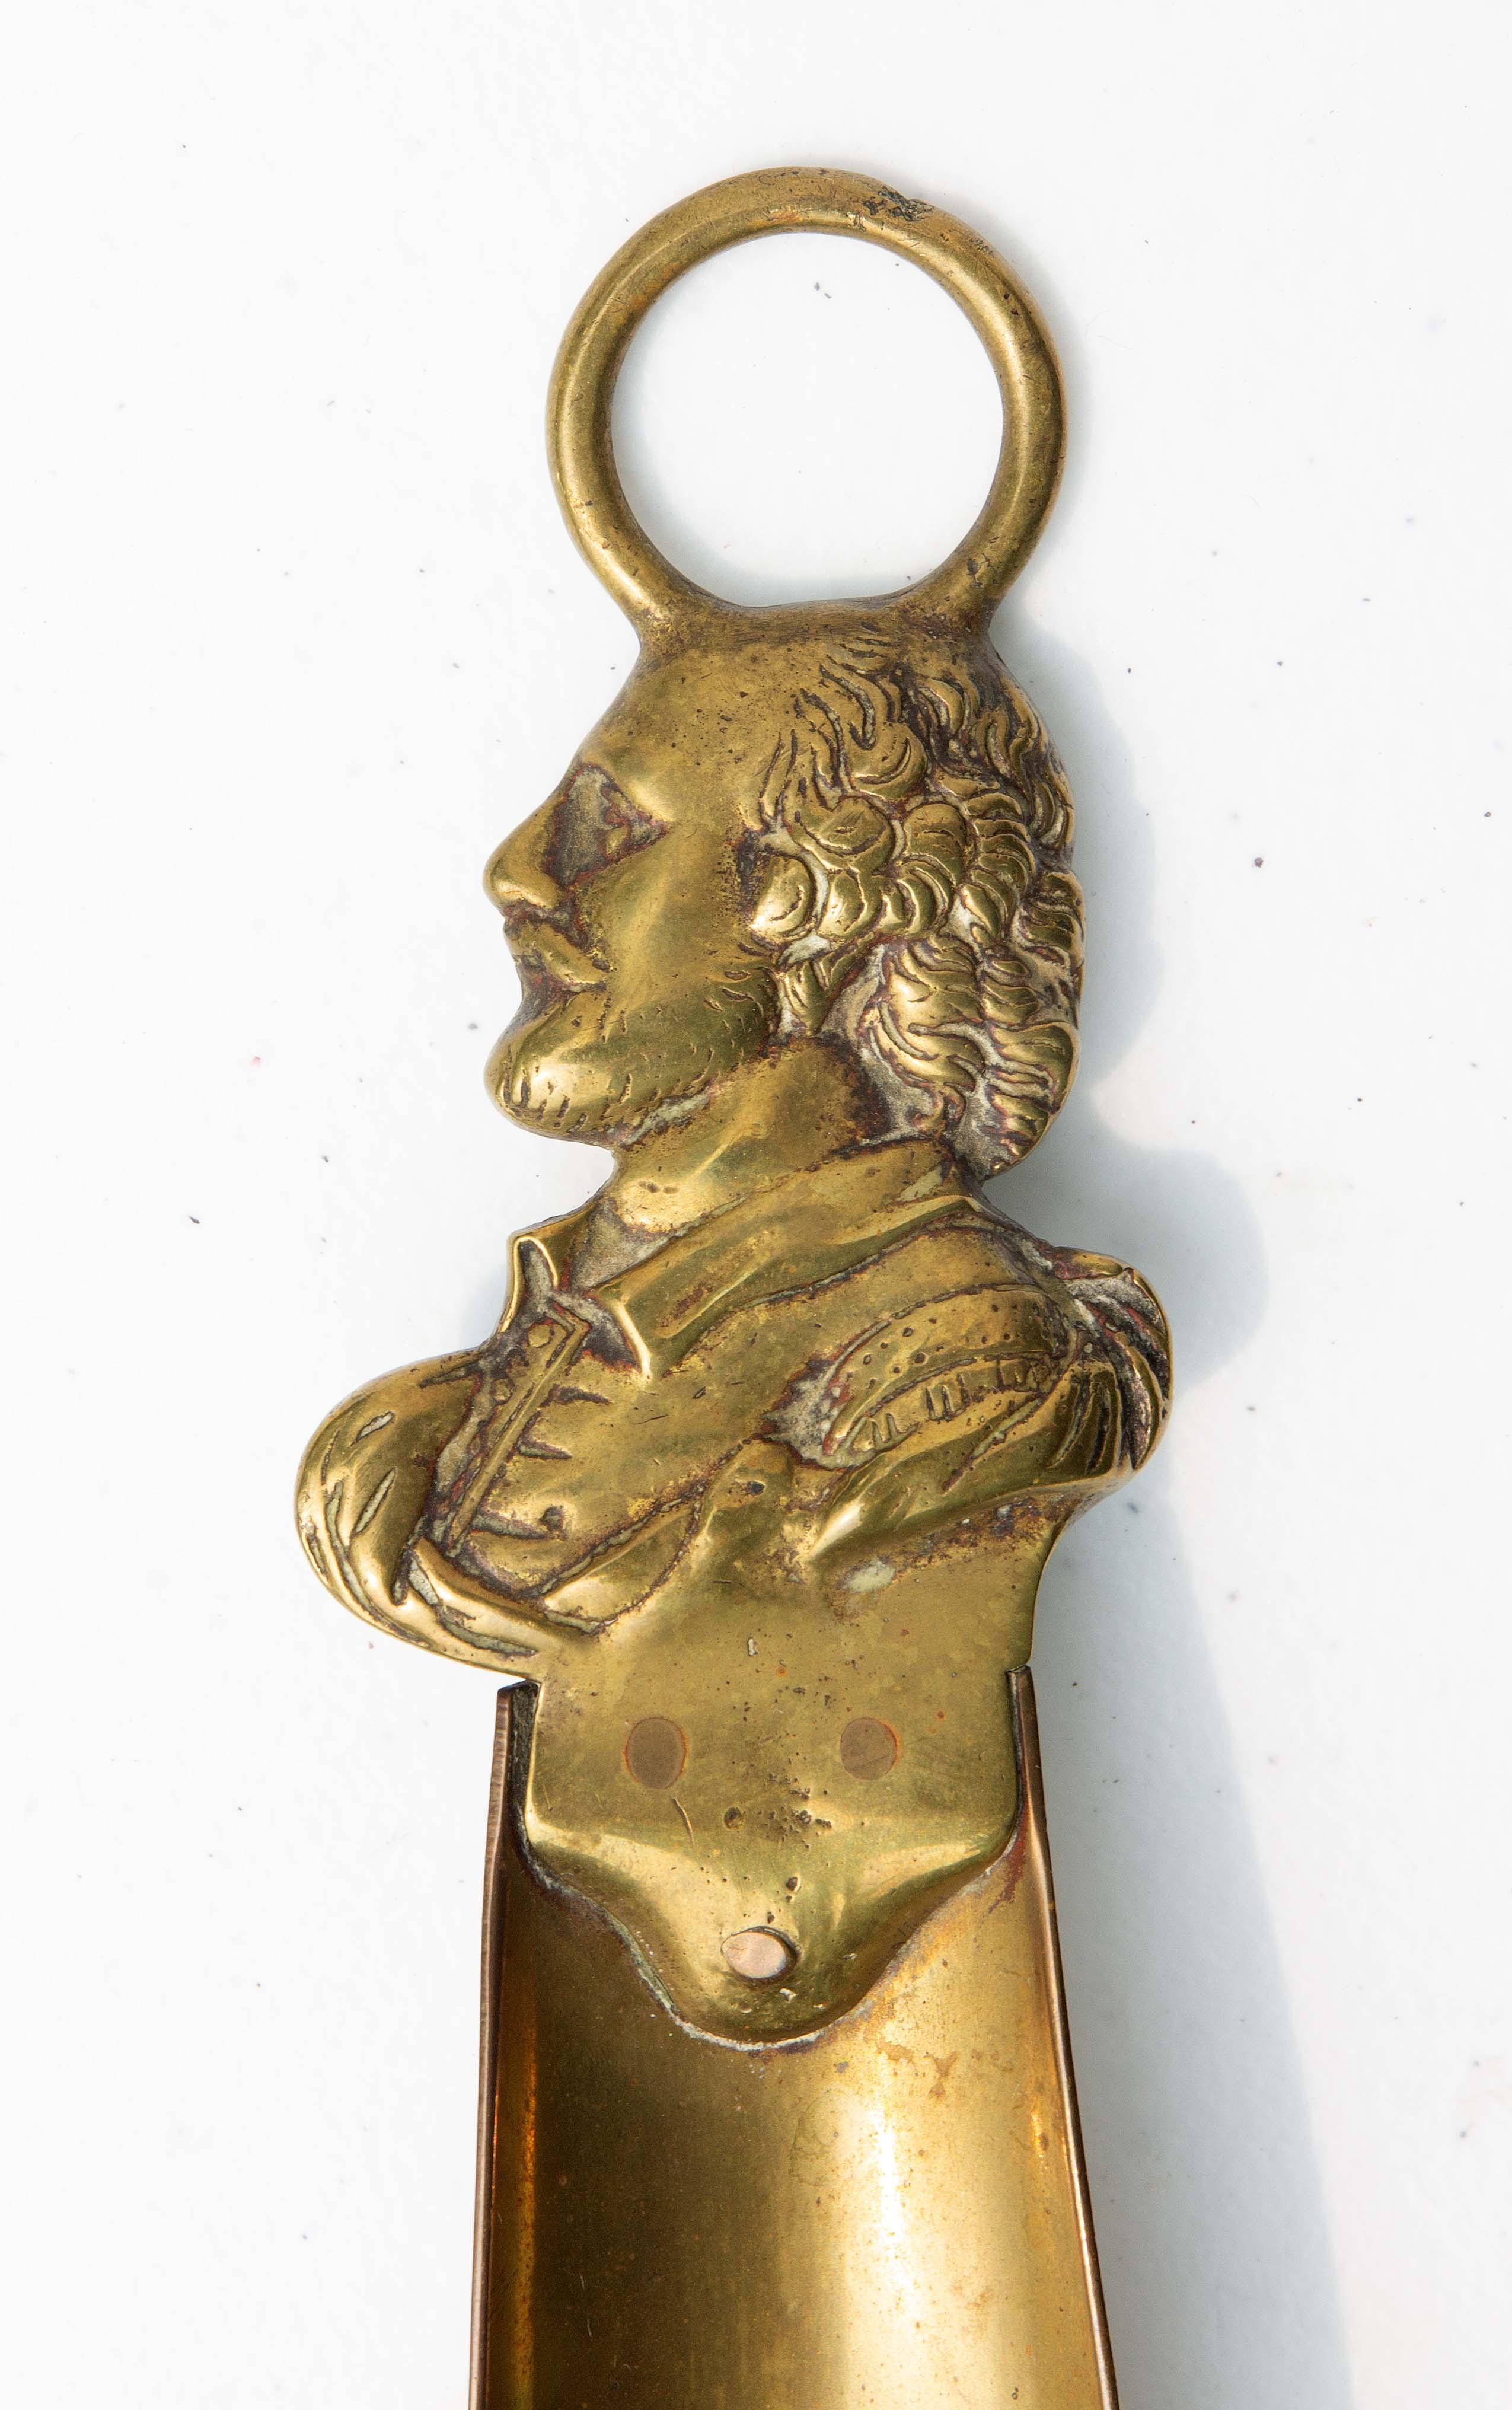 English brass shoehorn with the portrait of William Shakespeare, circa 1820.